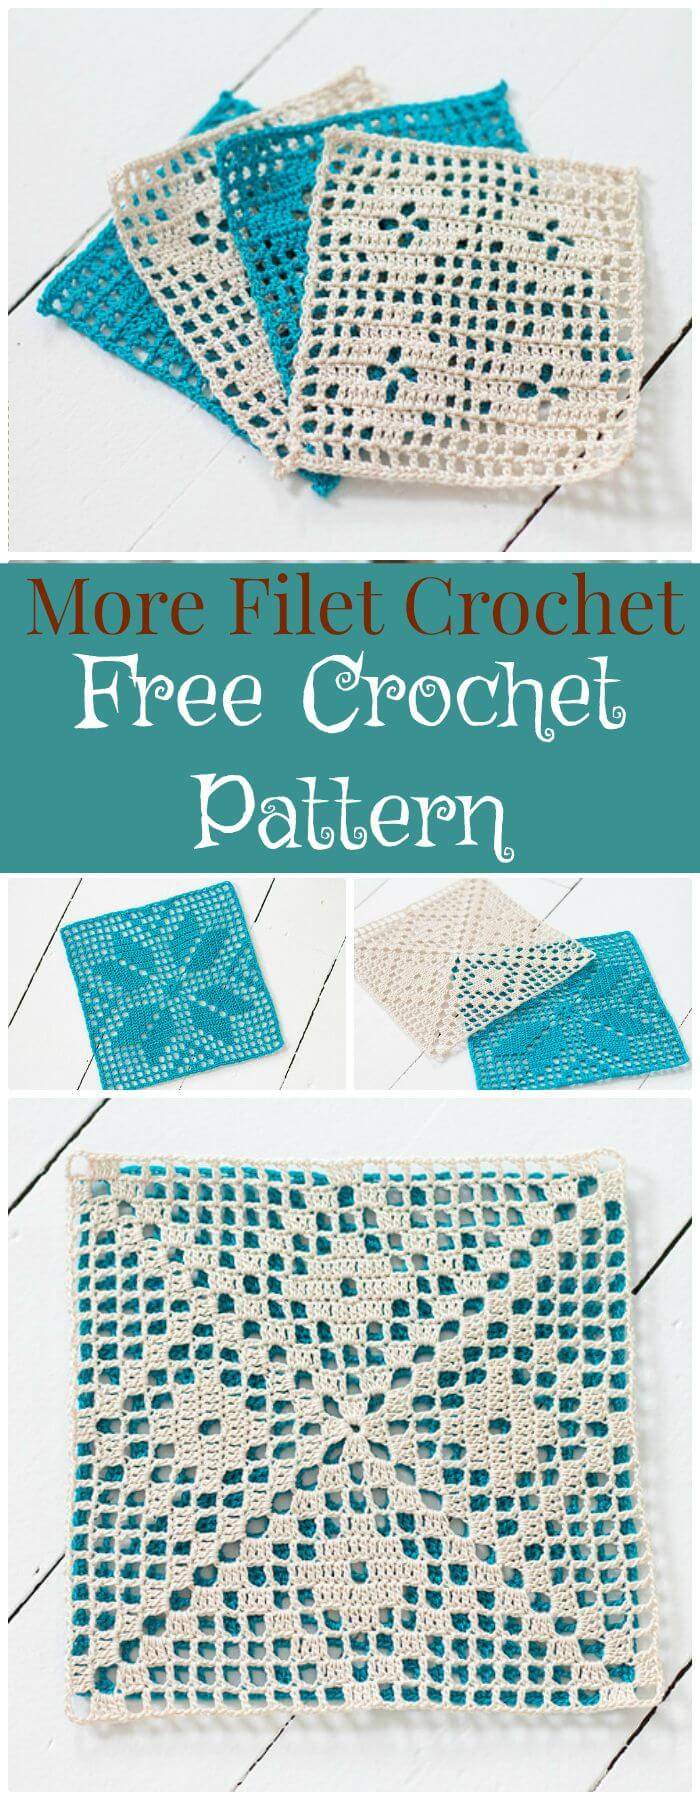 Crochet Coasters 70 Free Patterns For Beginners Diy Crafts,Chinese Eggplant